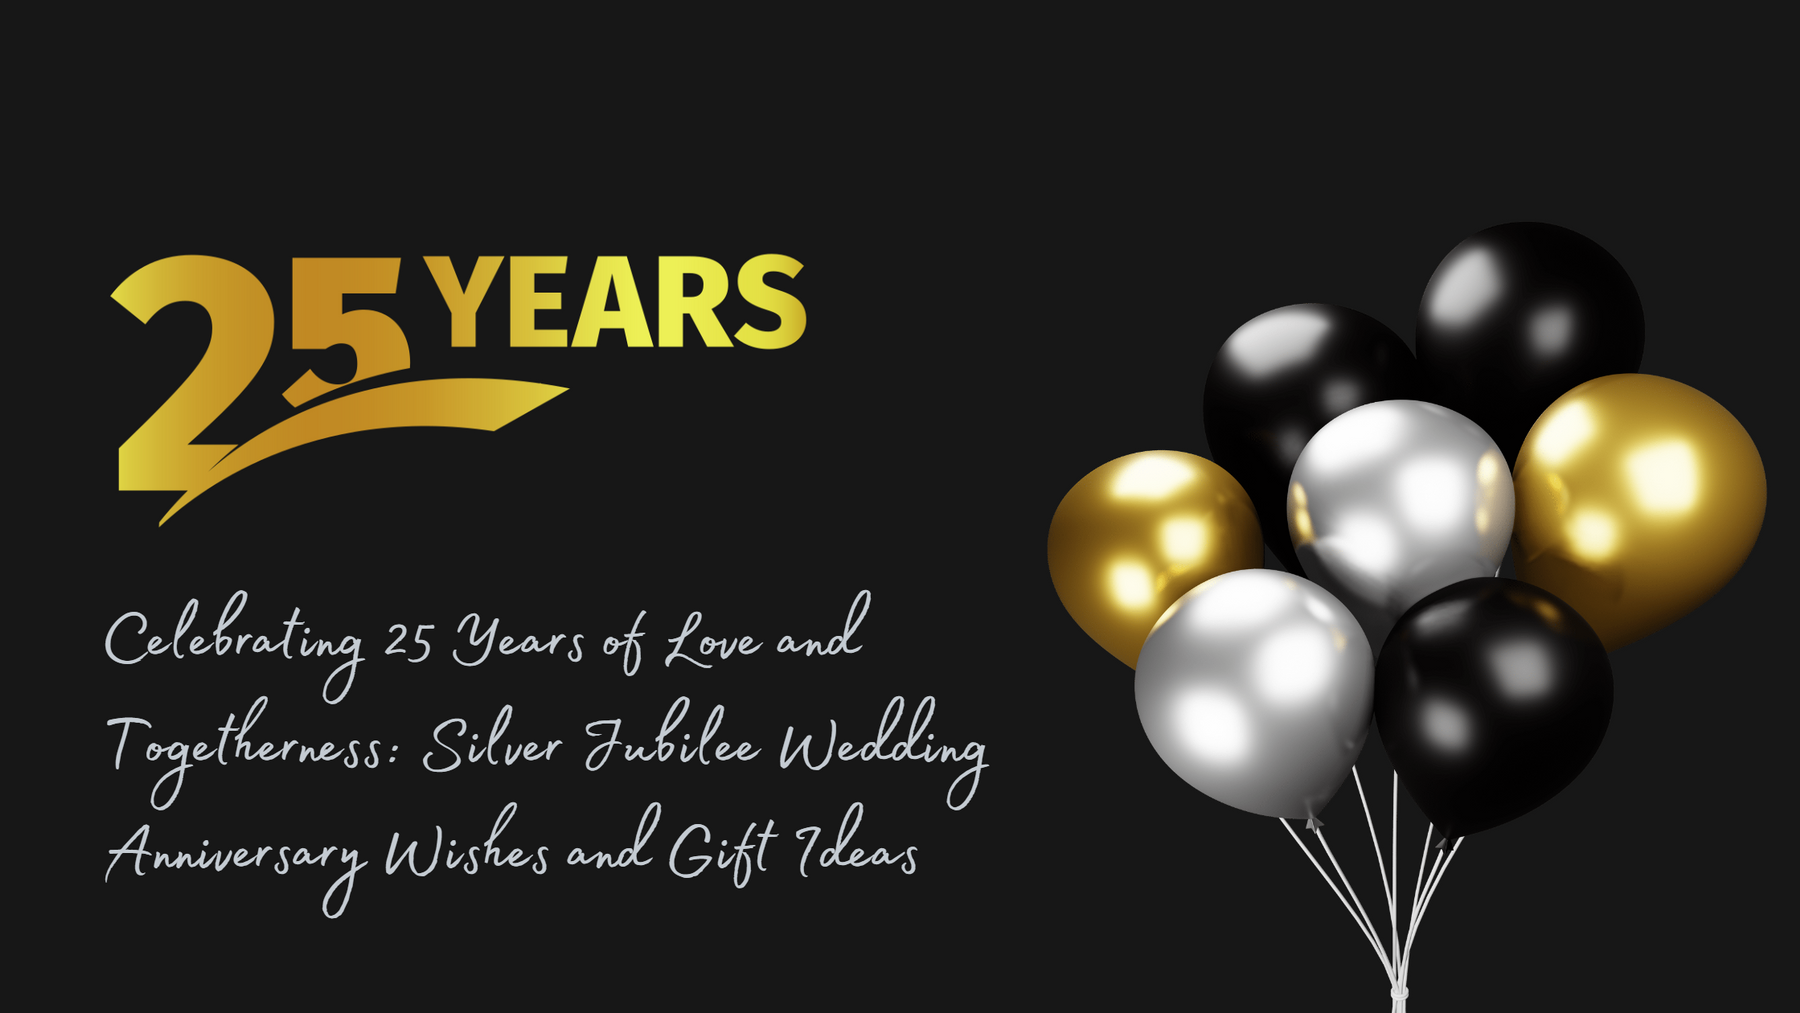 Celebrating 25 Years of Love and Togetherness: Silver Jubilee Wedding Anniversary Wishes and Gift Ideas